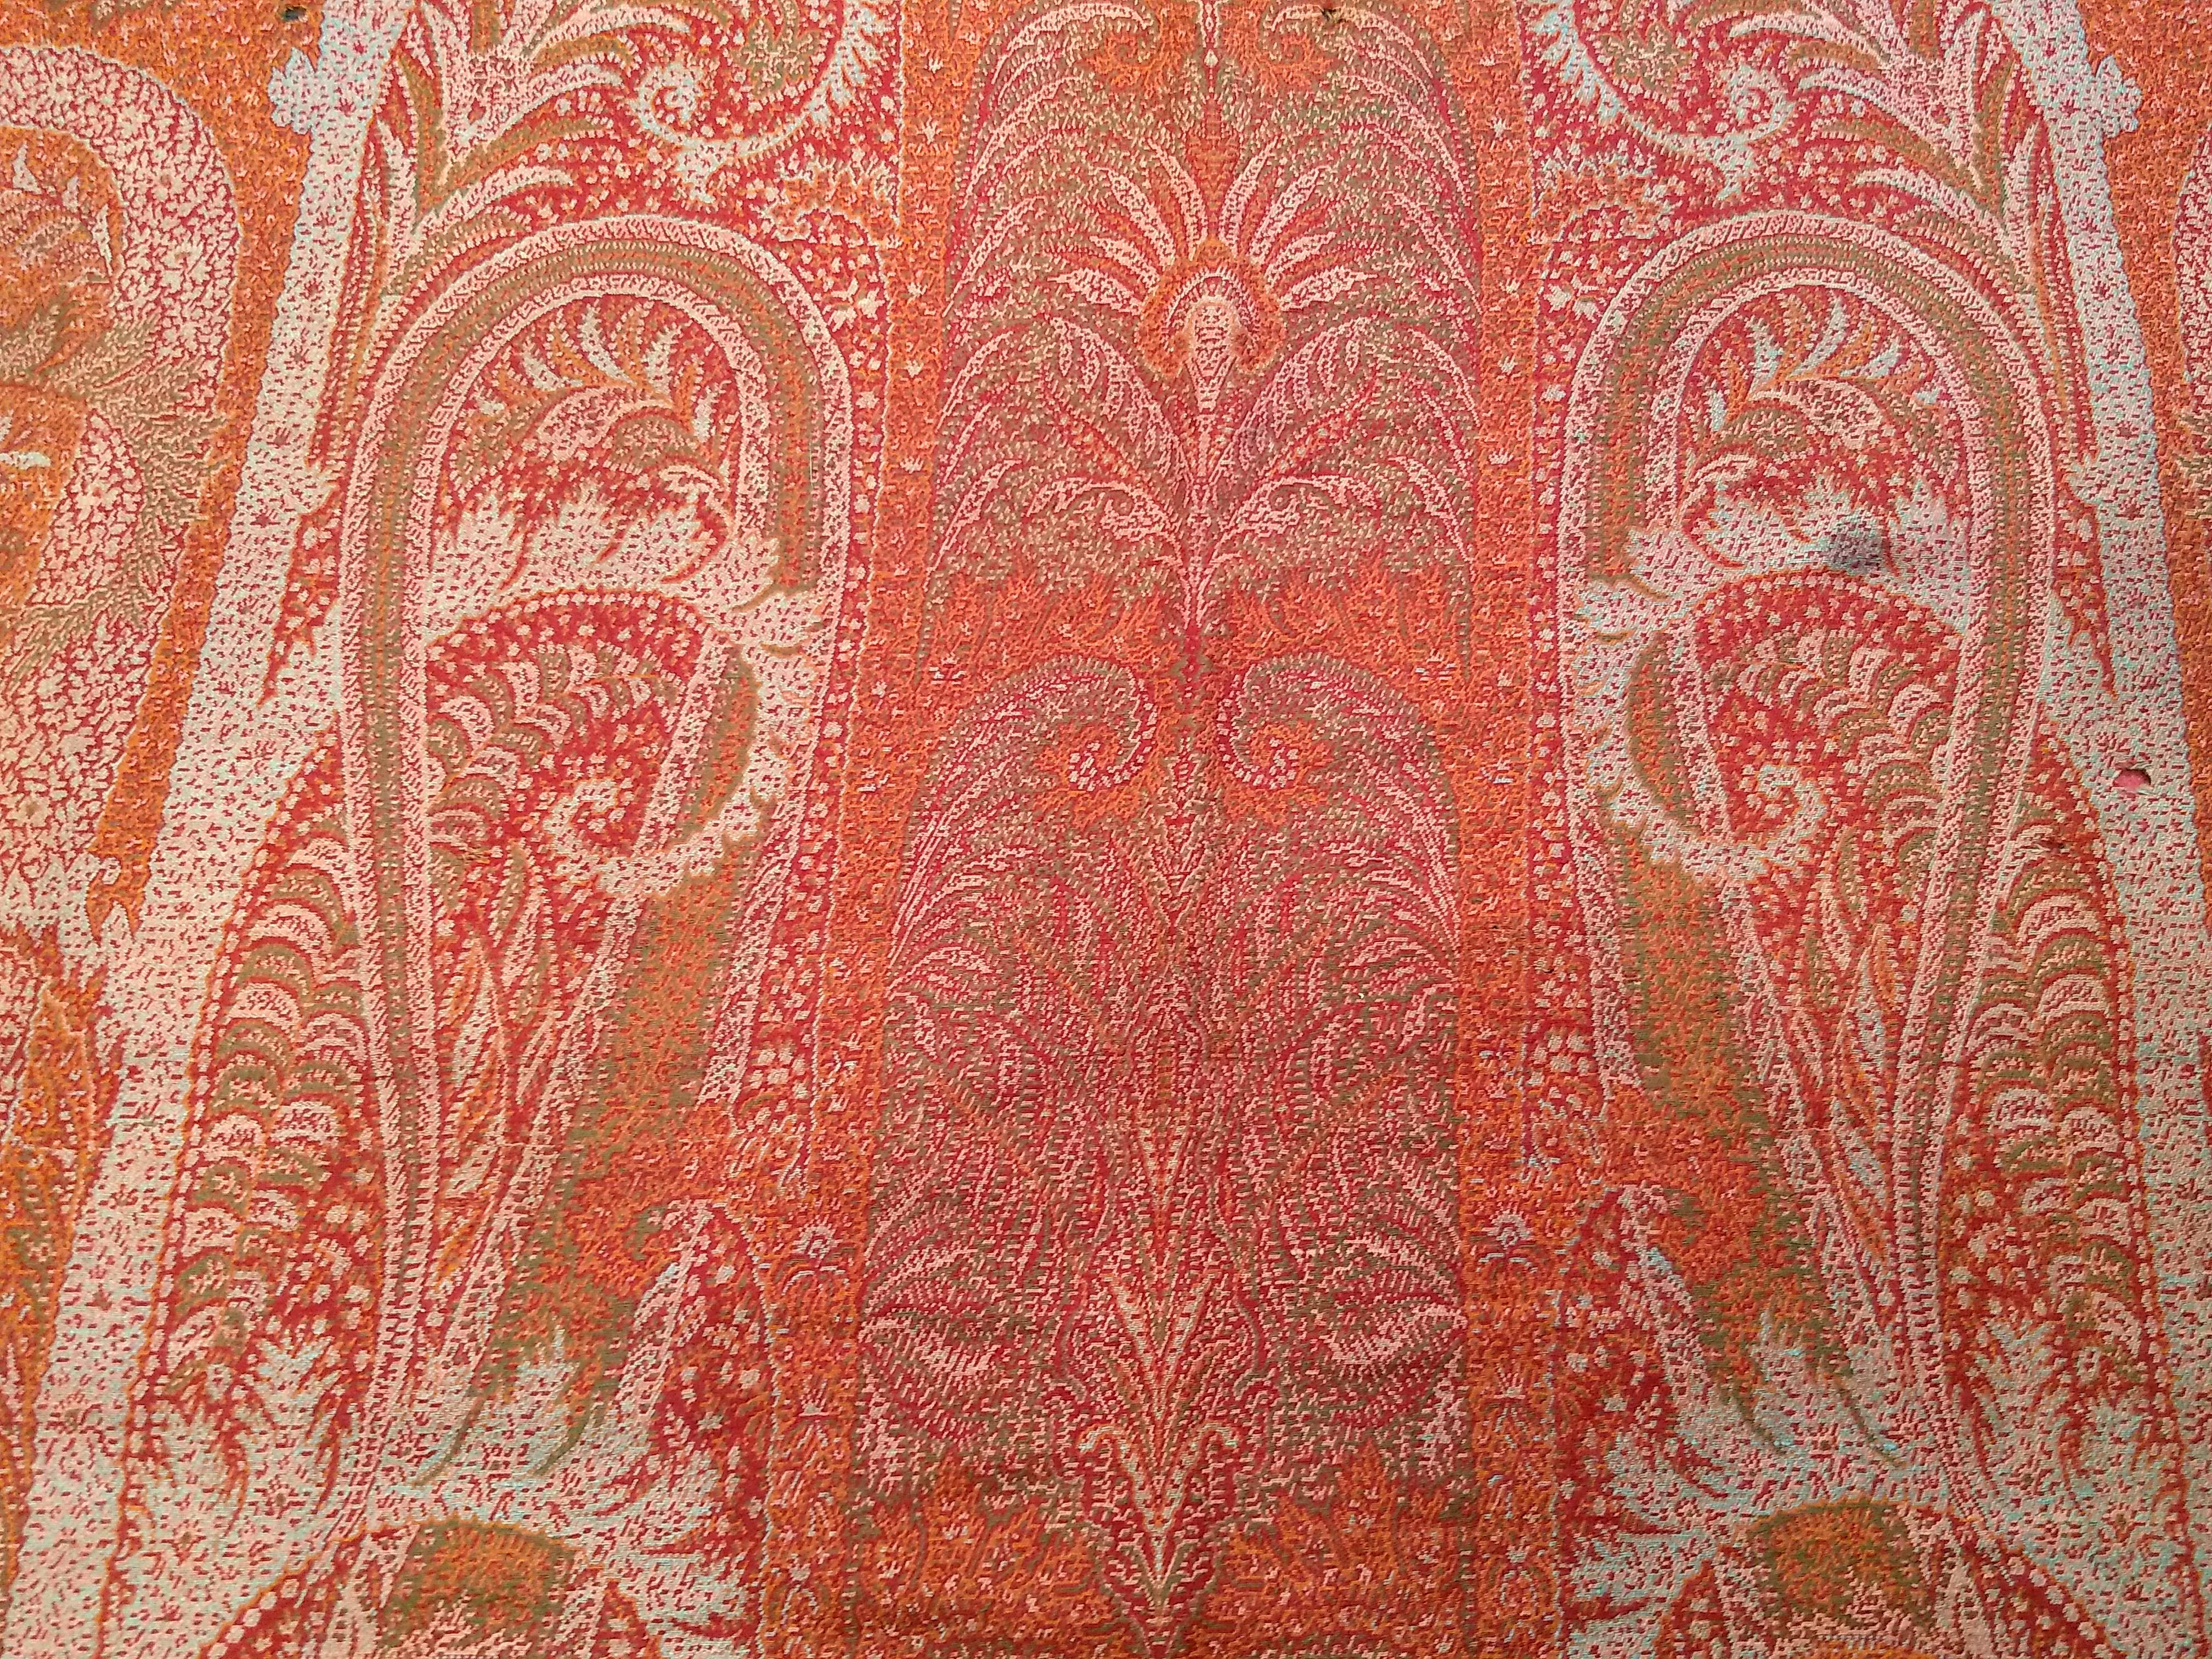 Mid 19th Century Paisley Shawl in Red, Ivory, Black, Green. Orange For Sale 4